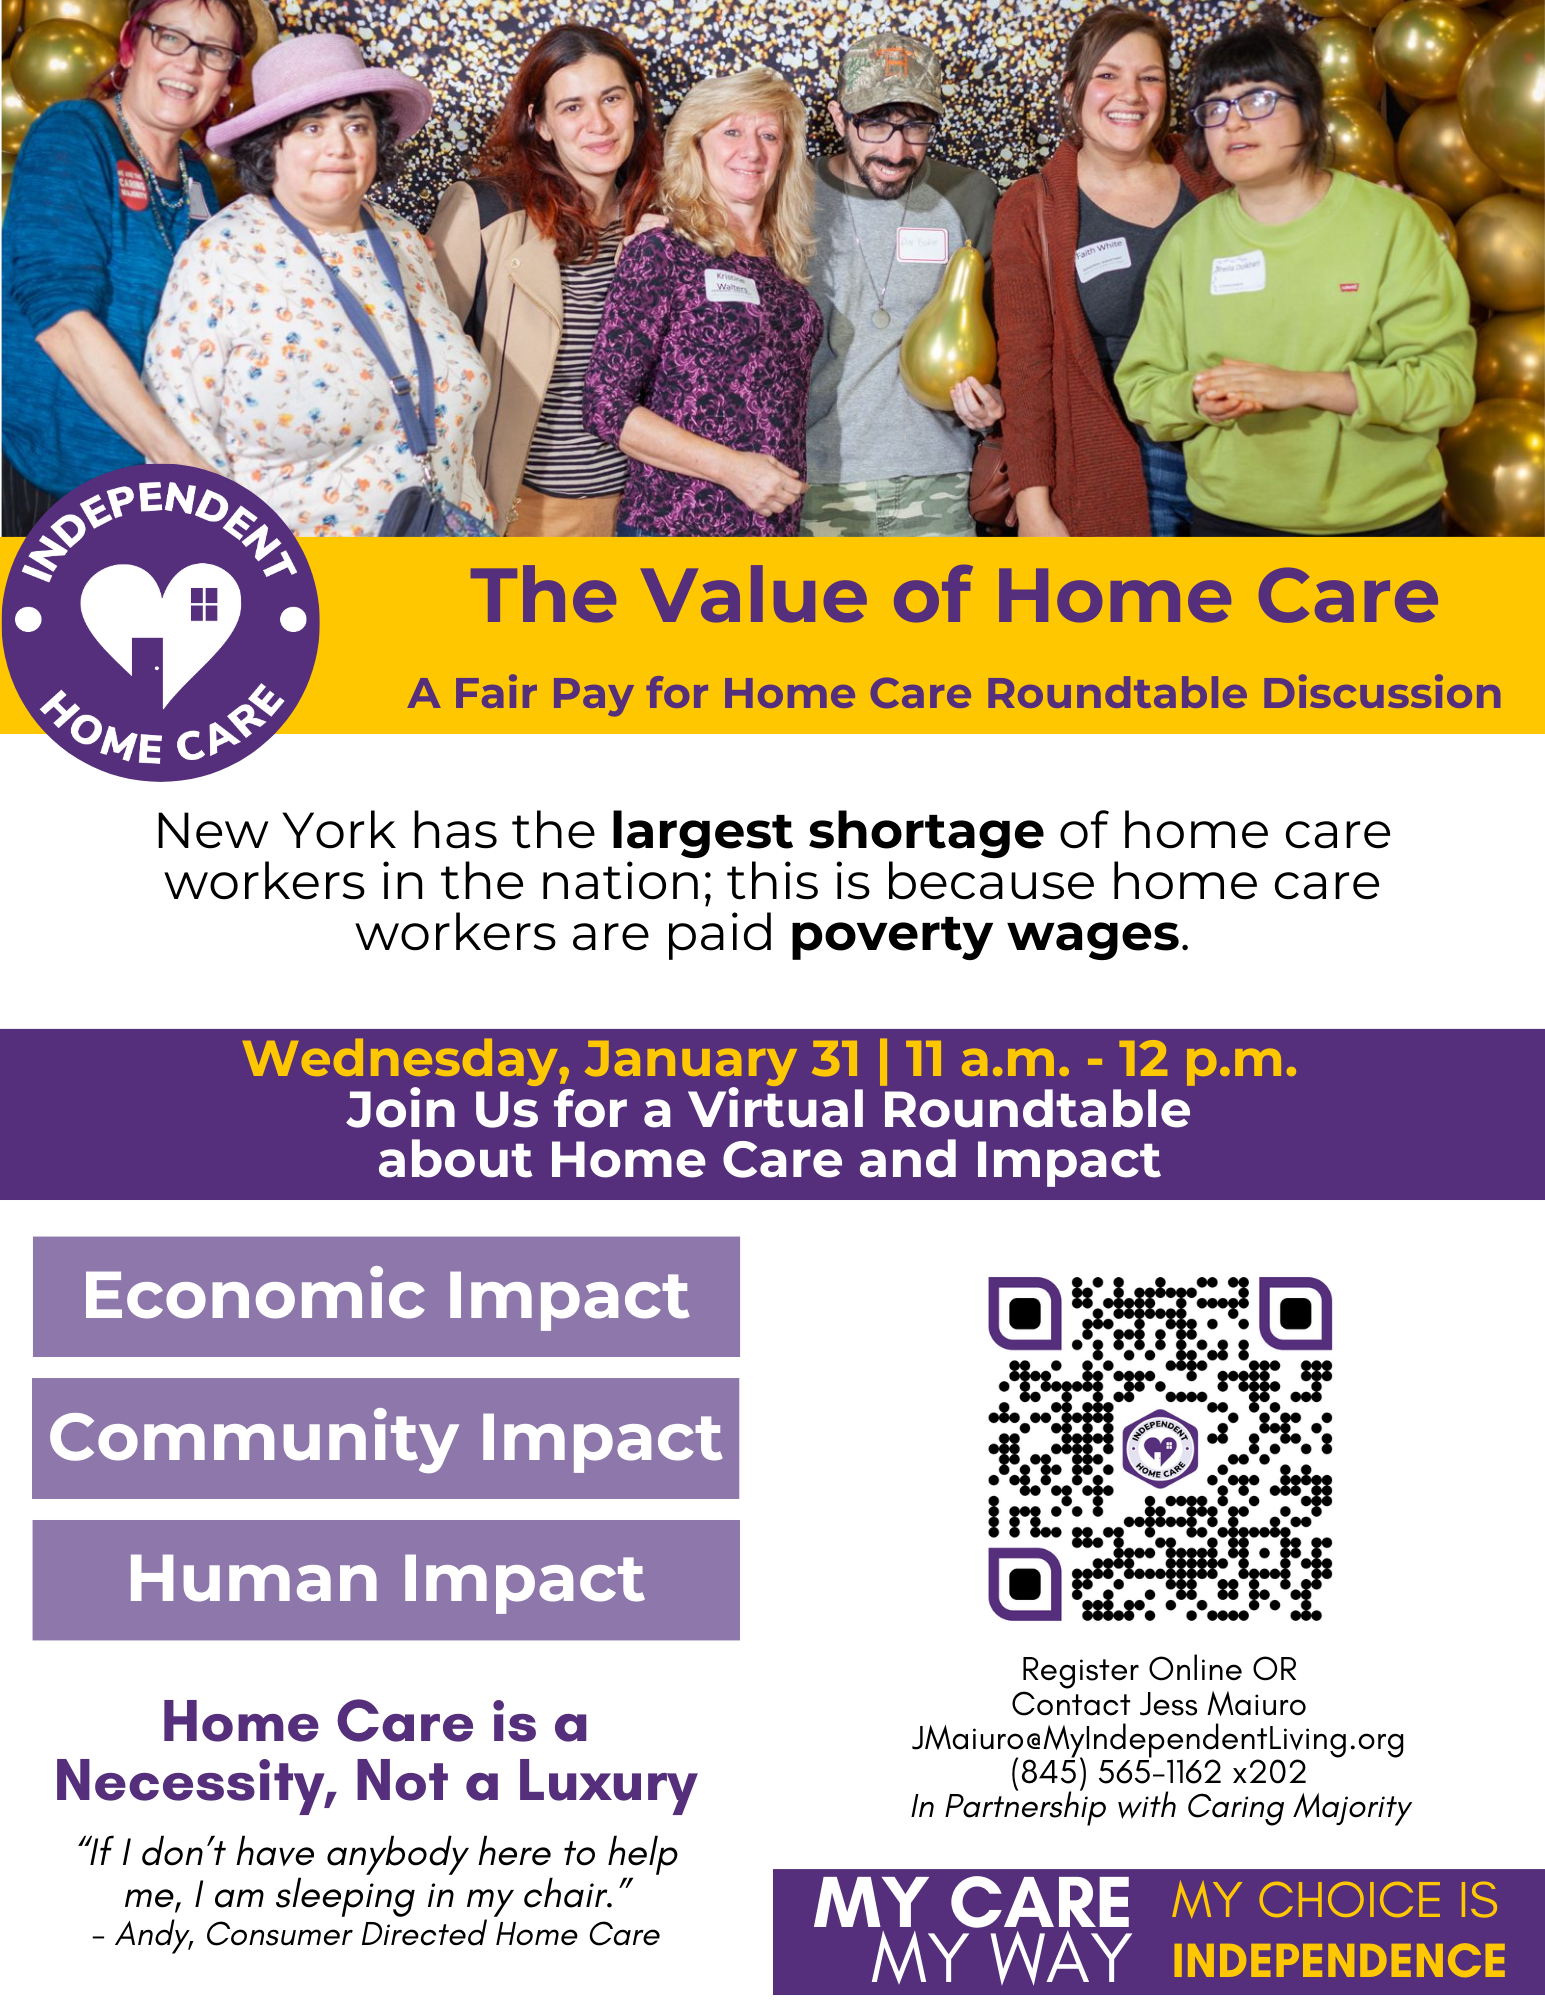 Image of an event flyer. Pictured at the top of the flyer is 7 people in front of a black and gold background with balloons. A QR code is on the bottom right of the flyer. Text: The Value of Home Care A Fair Pay for Home Care Roundtable Discussion New York has the largest shortage of home care workers in the nation; this is because home care workers are paid poverty wages.“If I don’t have anybody here to help me, I am sleeping in my chair.” - Andy, Consumer Directed Home Care Register Online OR Contact Jess Maiuro JMaiuro@MyIndependentLiving.org (845) 565-1162 x202 In Partnership with Caring Majority